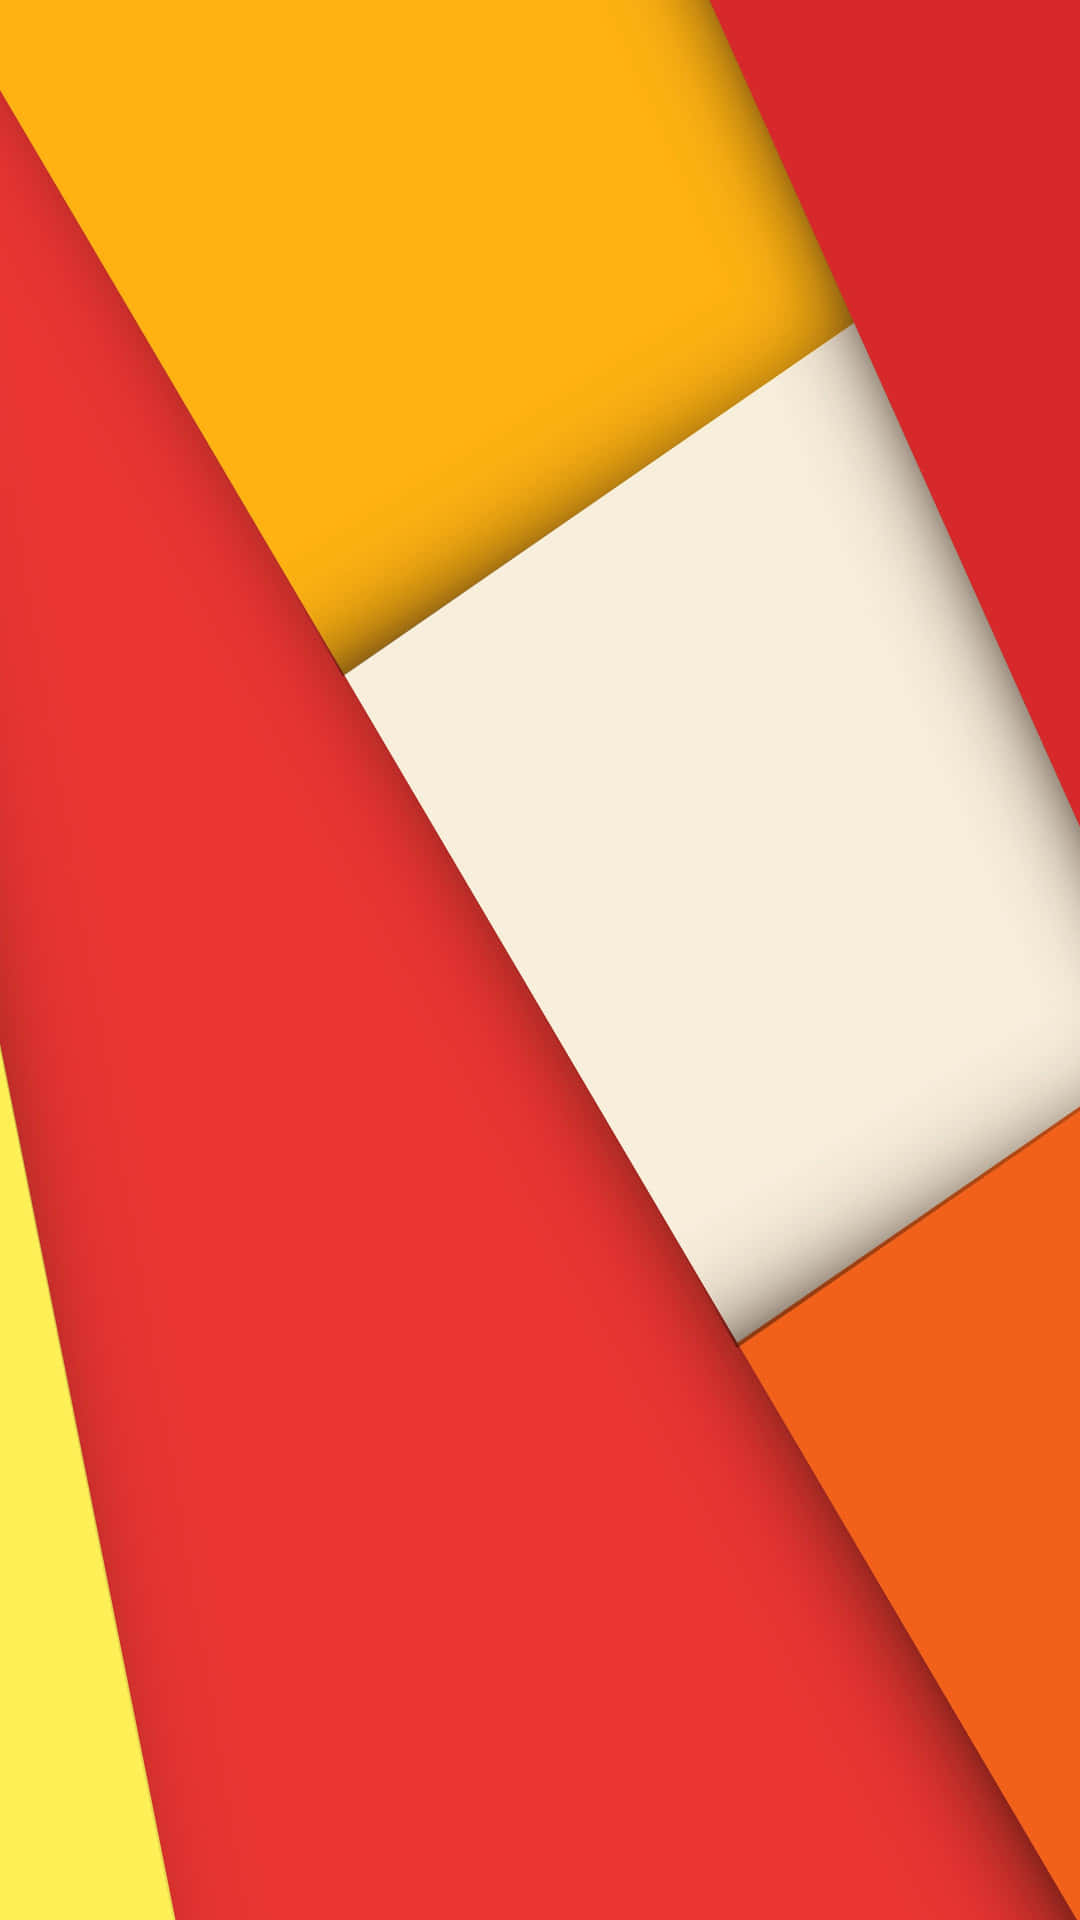 a colorful background with a yellow, orange and red color